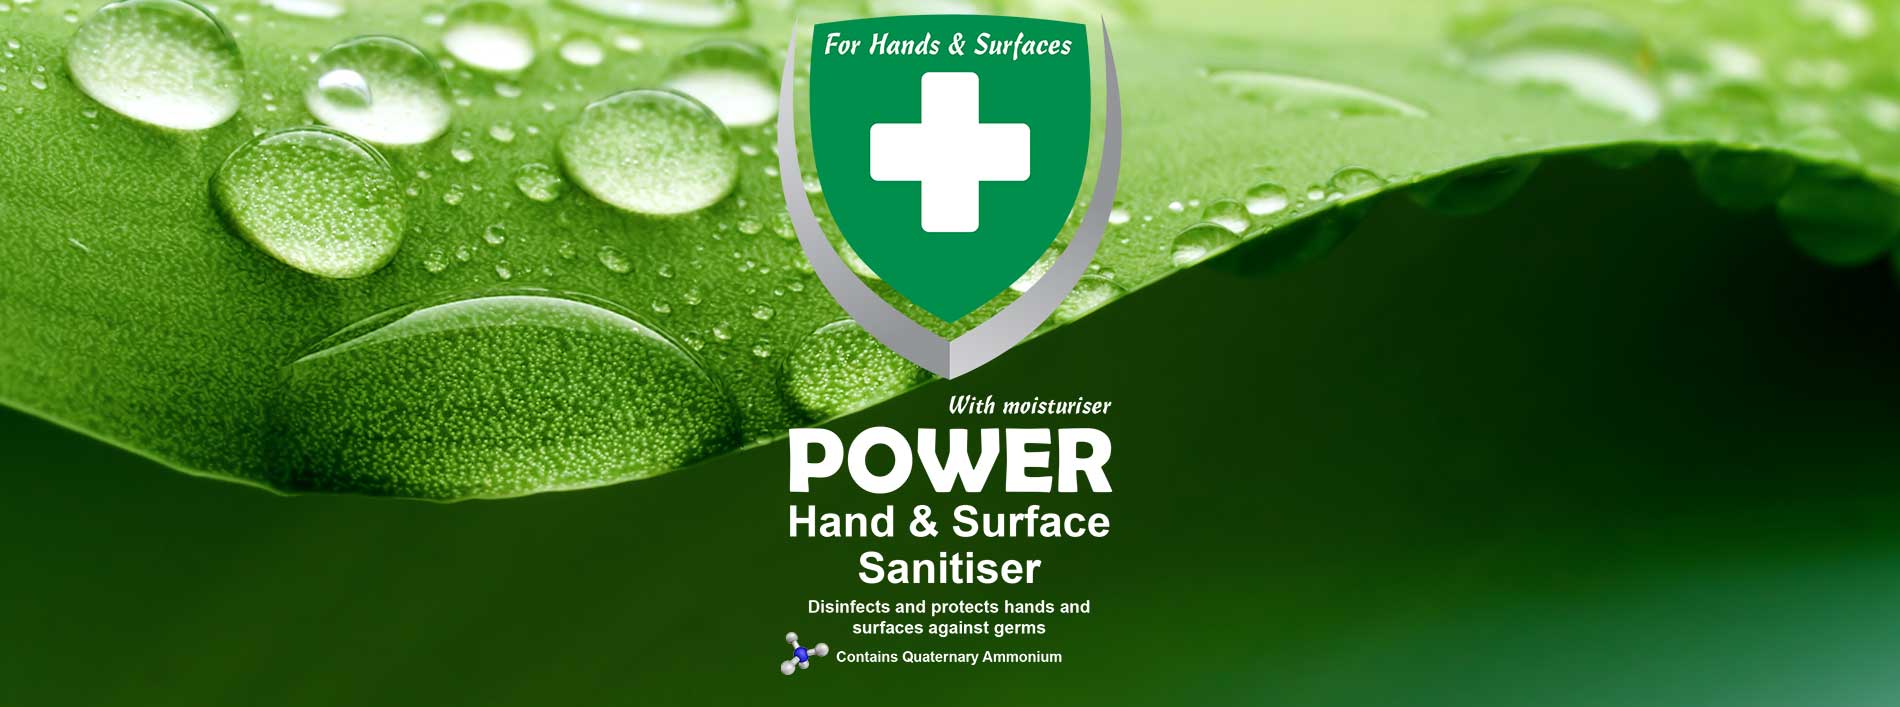 POWER Hand and Surface Sanitiser by Promek